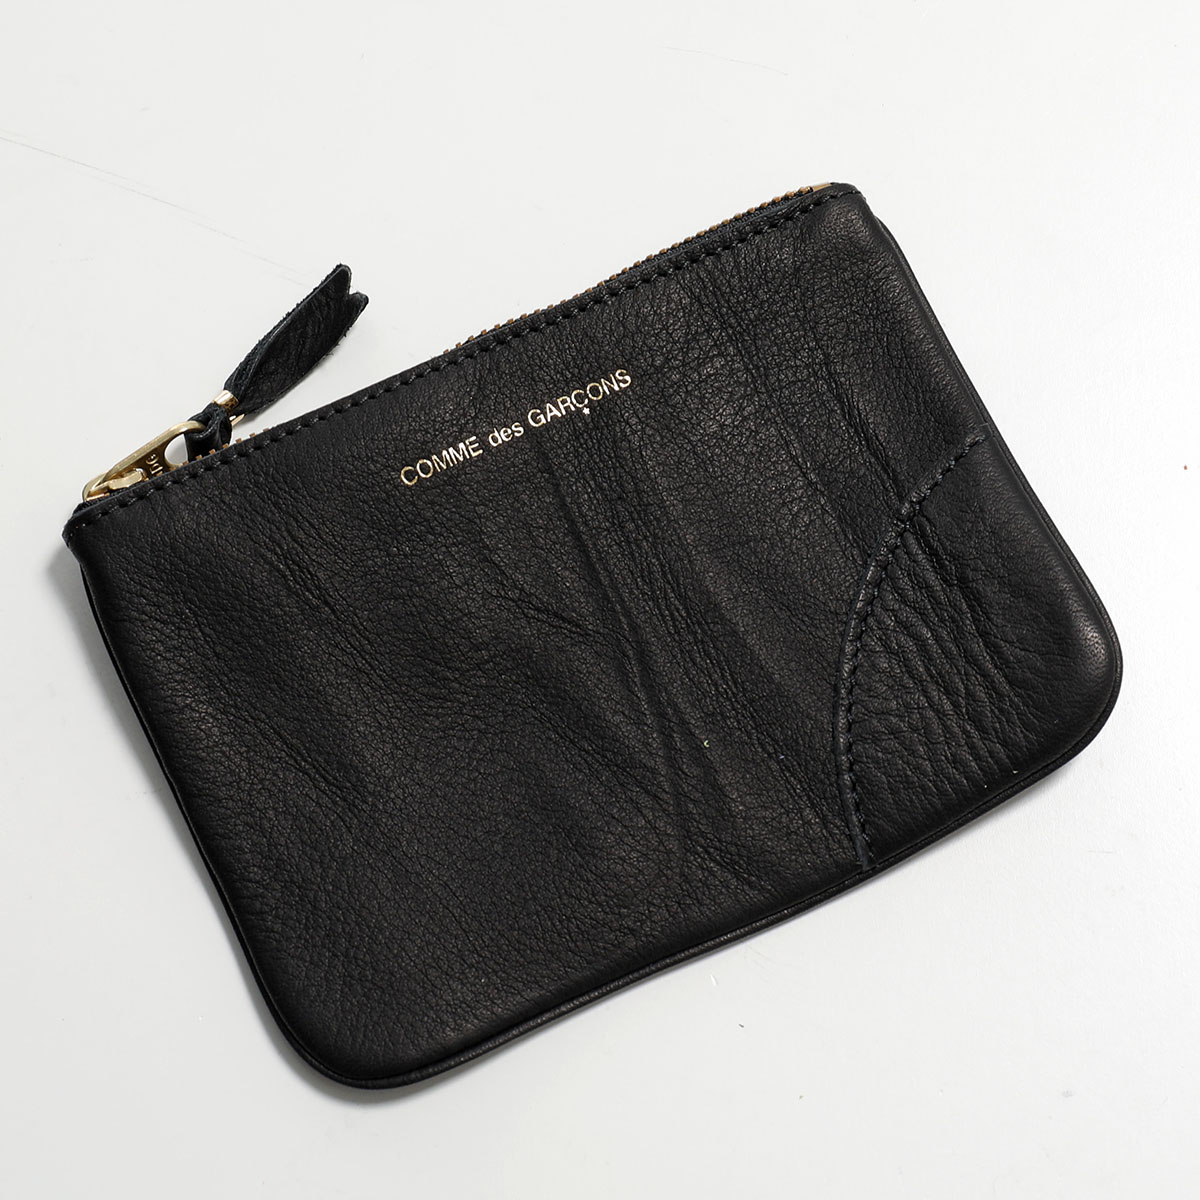 COMME des GARCONS コムデギャルソン コインケース WASHED WALLET SA8100WW メンズ カードケース レザー カラー4色｜s-musee｜02